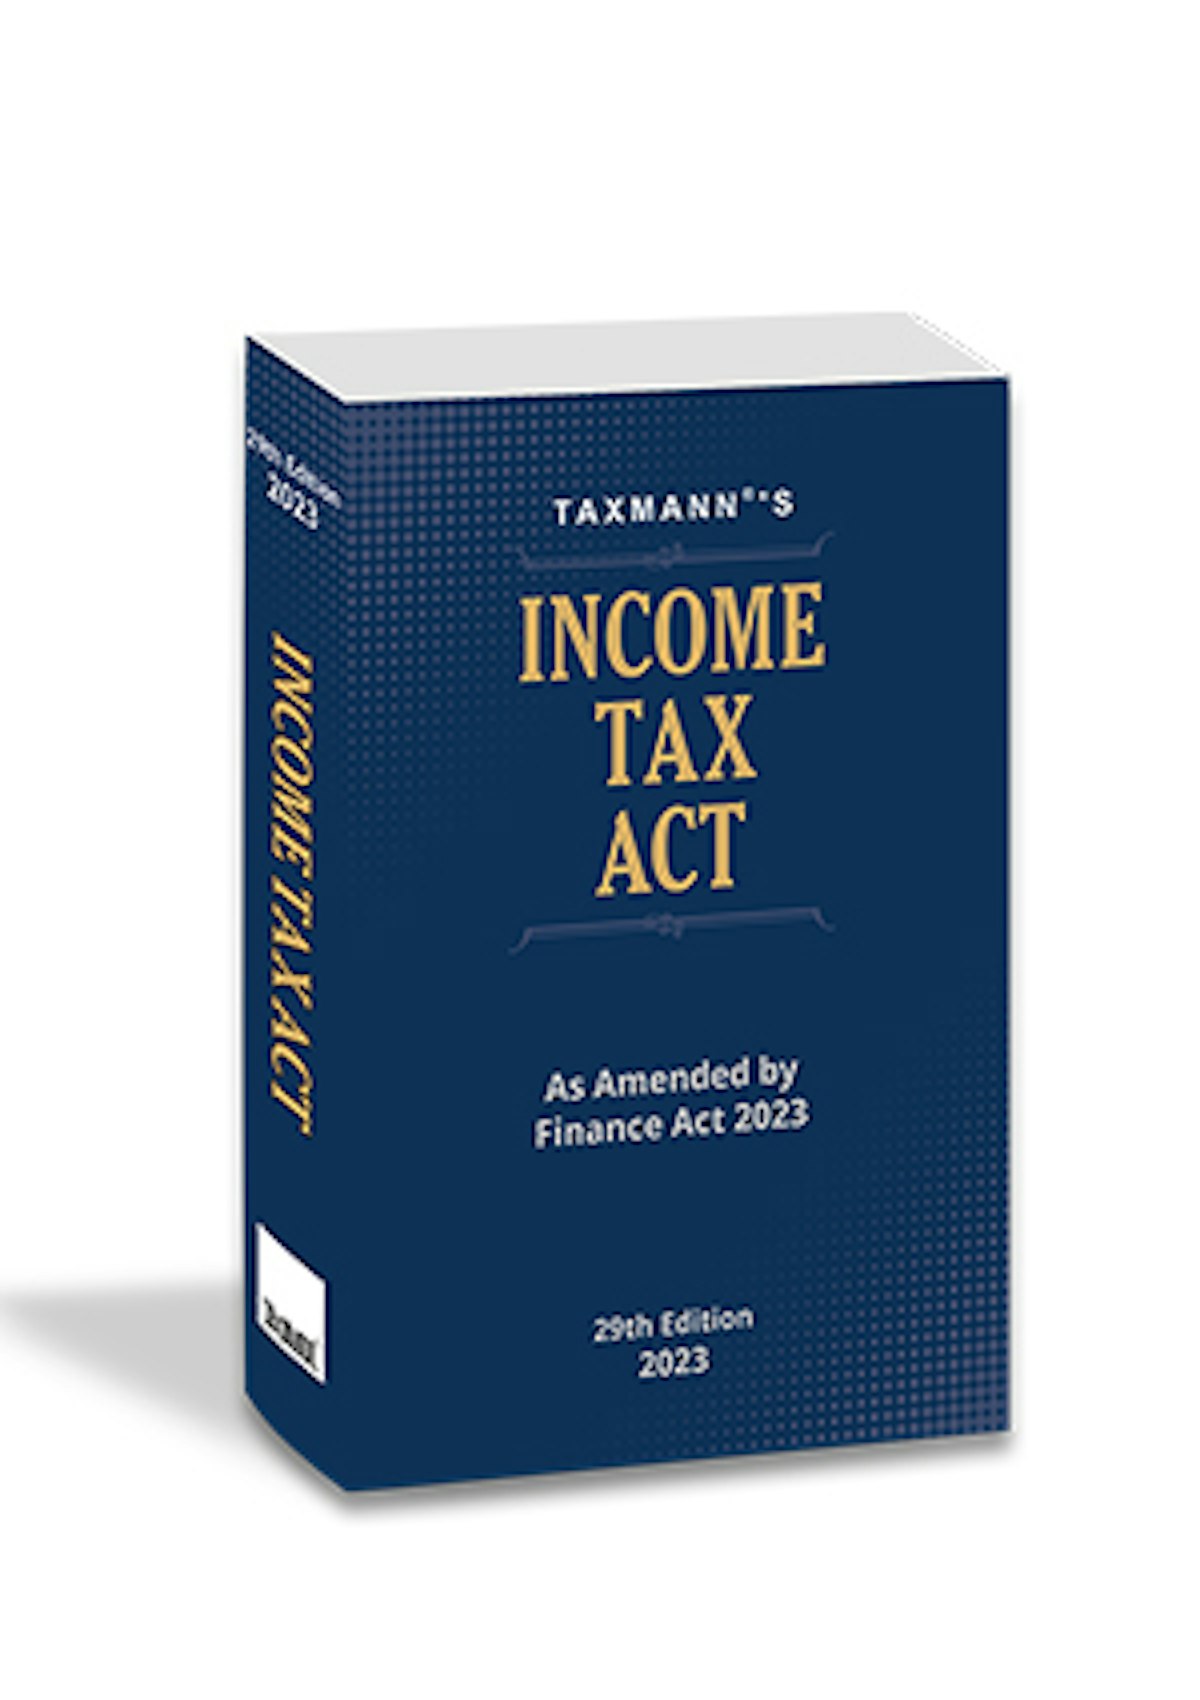 Tax Act POCKET Edition [Finance Act 2023] by Taxmann's